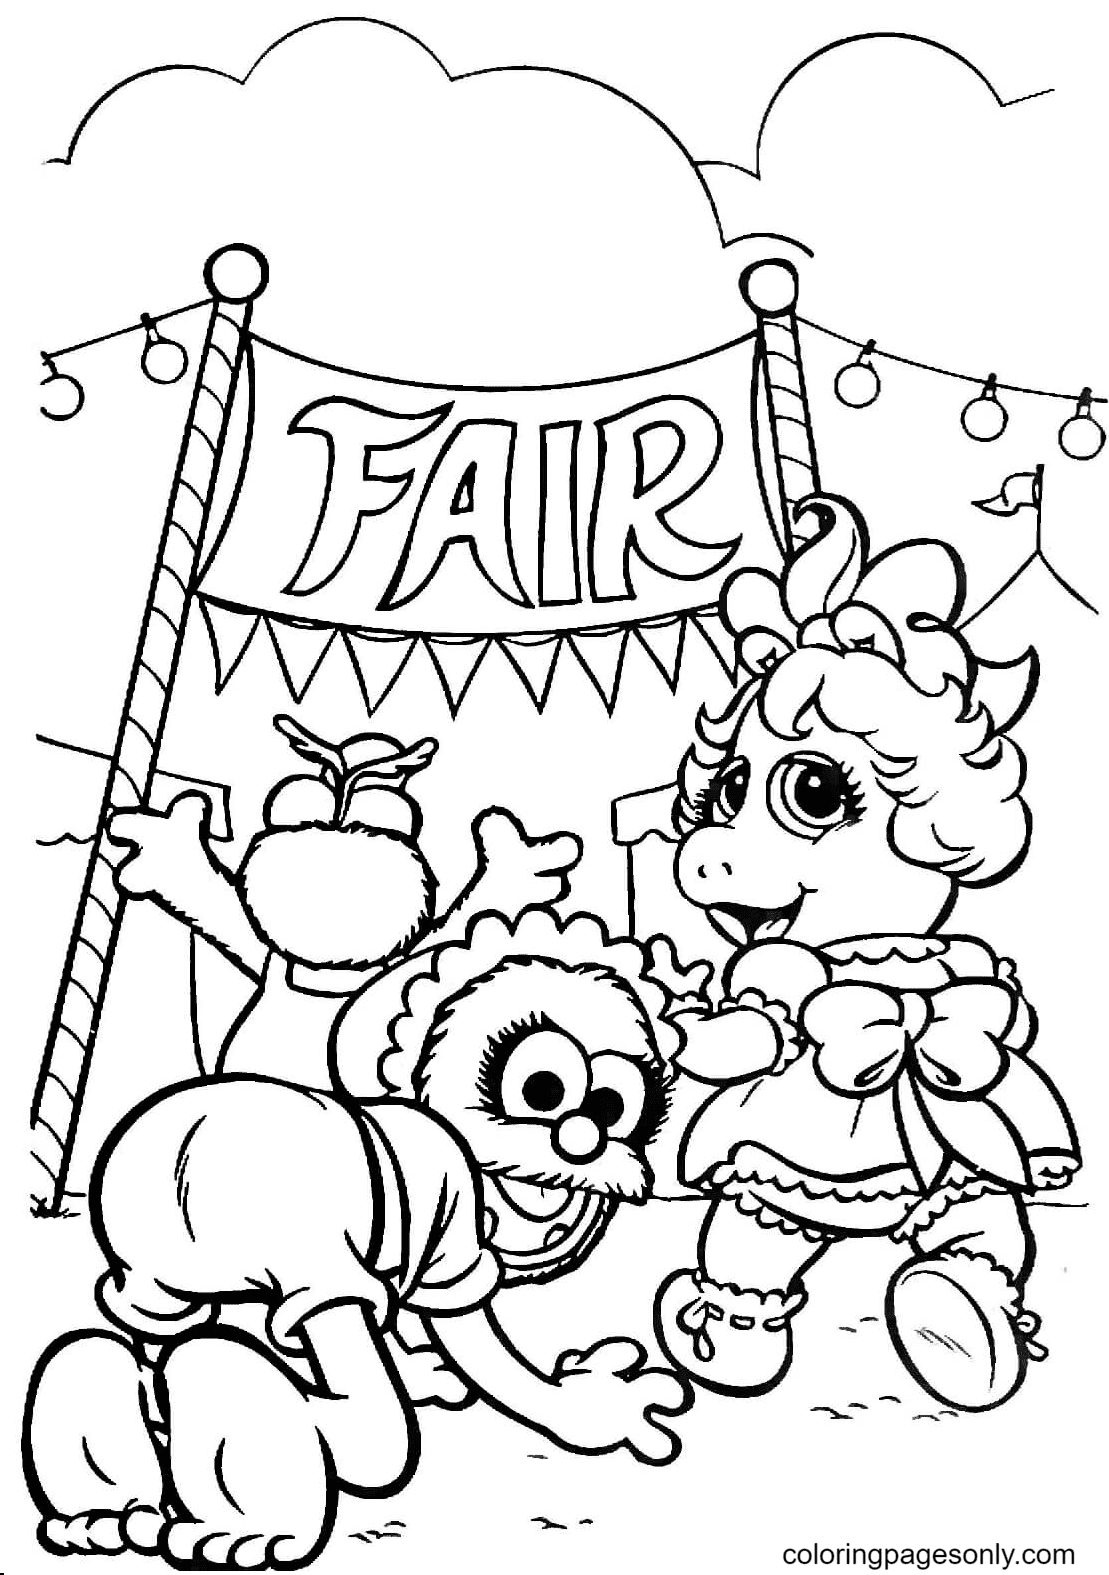 Muppet Babies on a Fair Market Coloring Pages